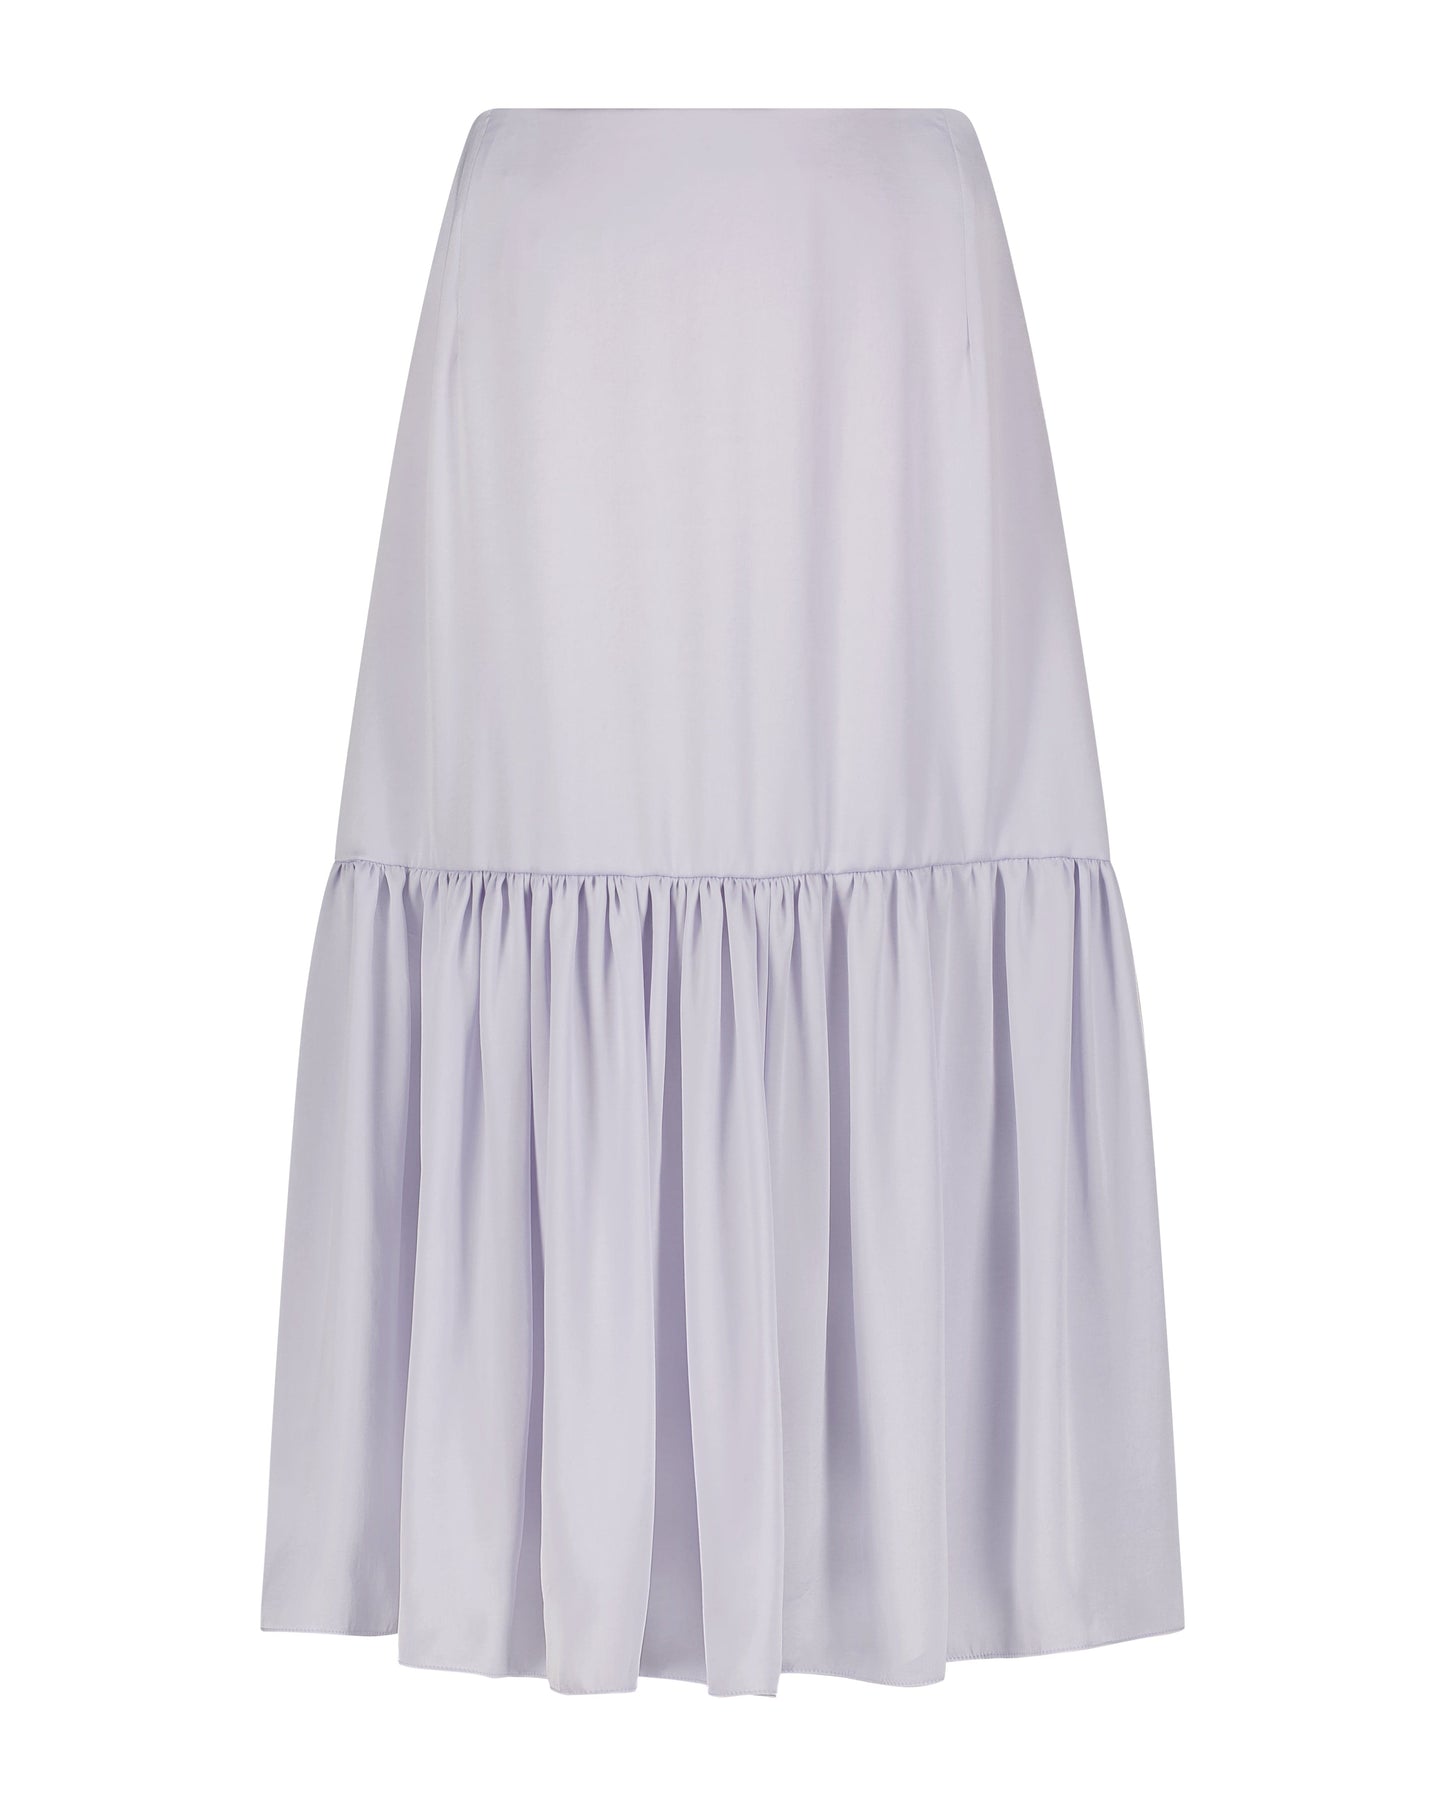 Colette Skirt in Japanese Charmeuse Skirts Christine Alcalay   